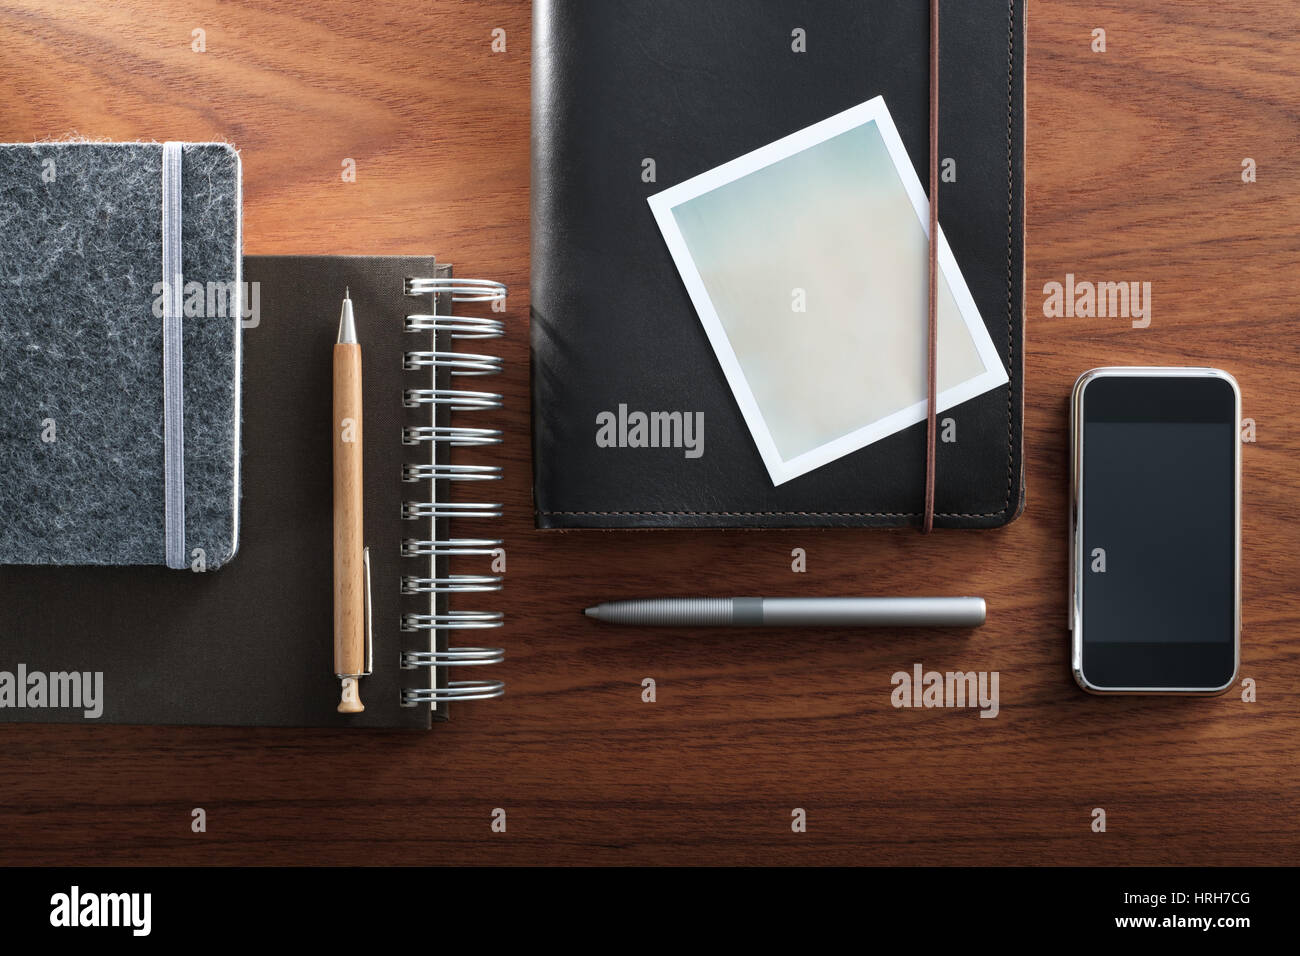 Notepads, instant camera film frame and pencil vs smartphone and digital pen. Analog and digital. Stock Photo